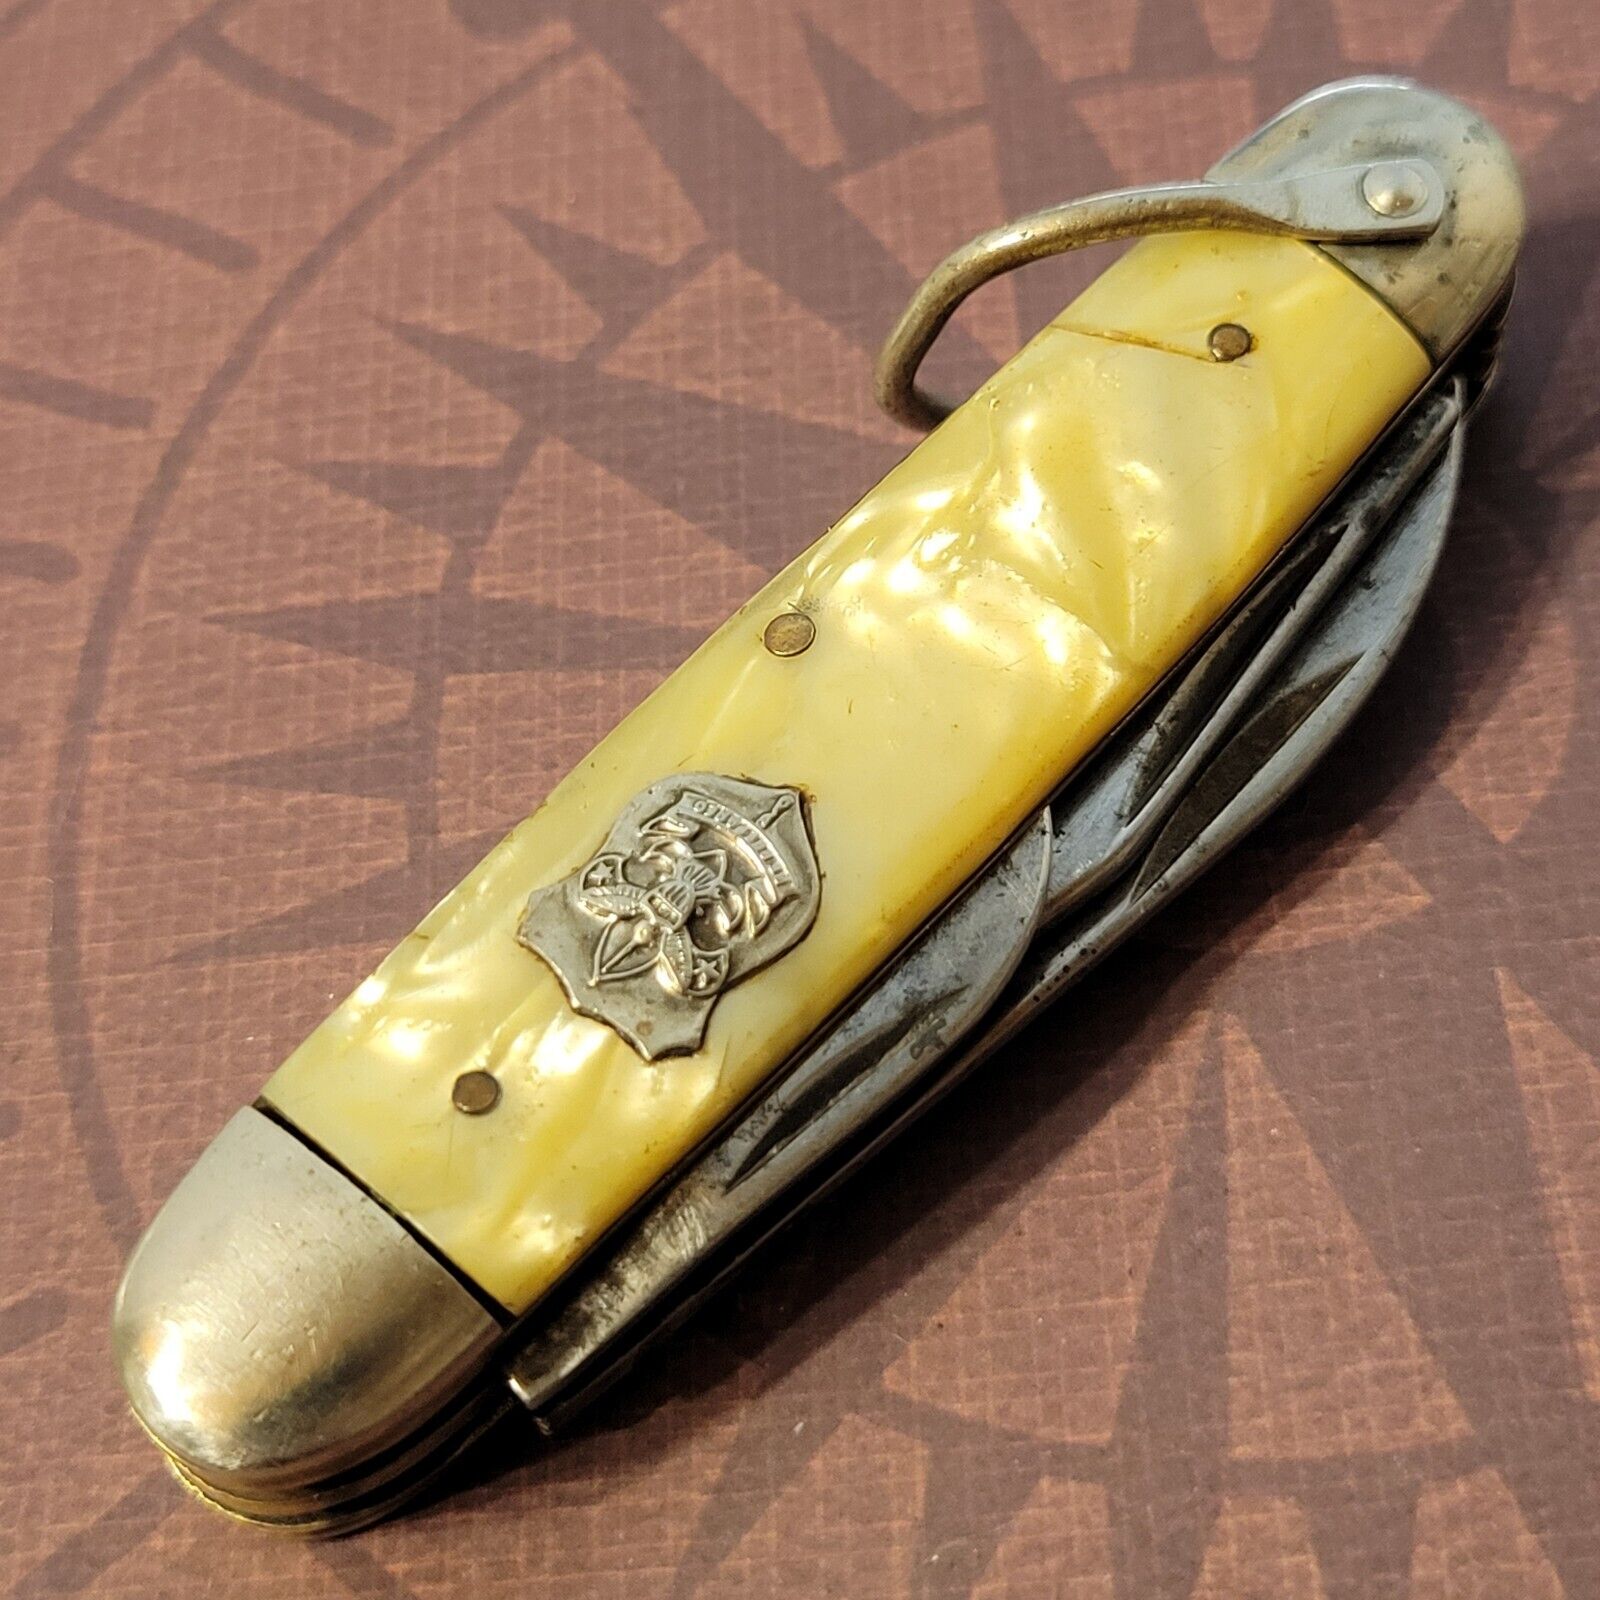 Boy Scouts Knife Made In USA 1936-52 By Imperial Campers Multi Tool Vintage